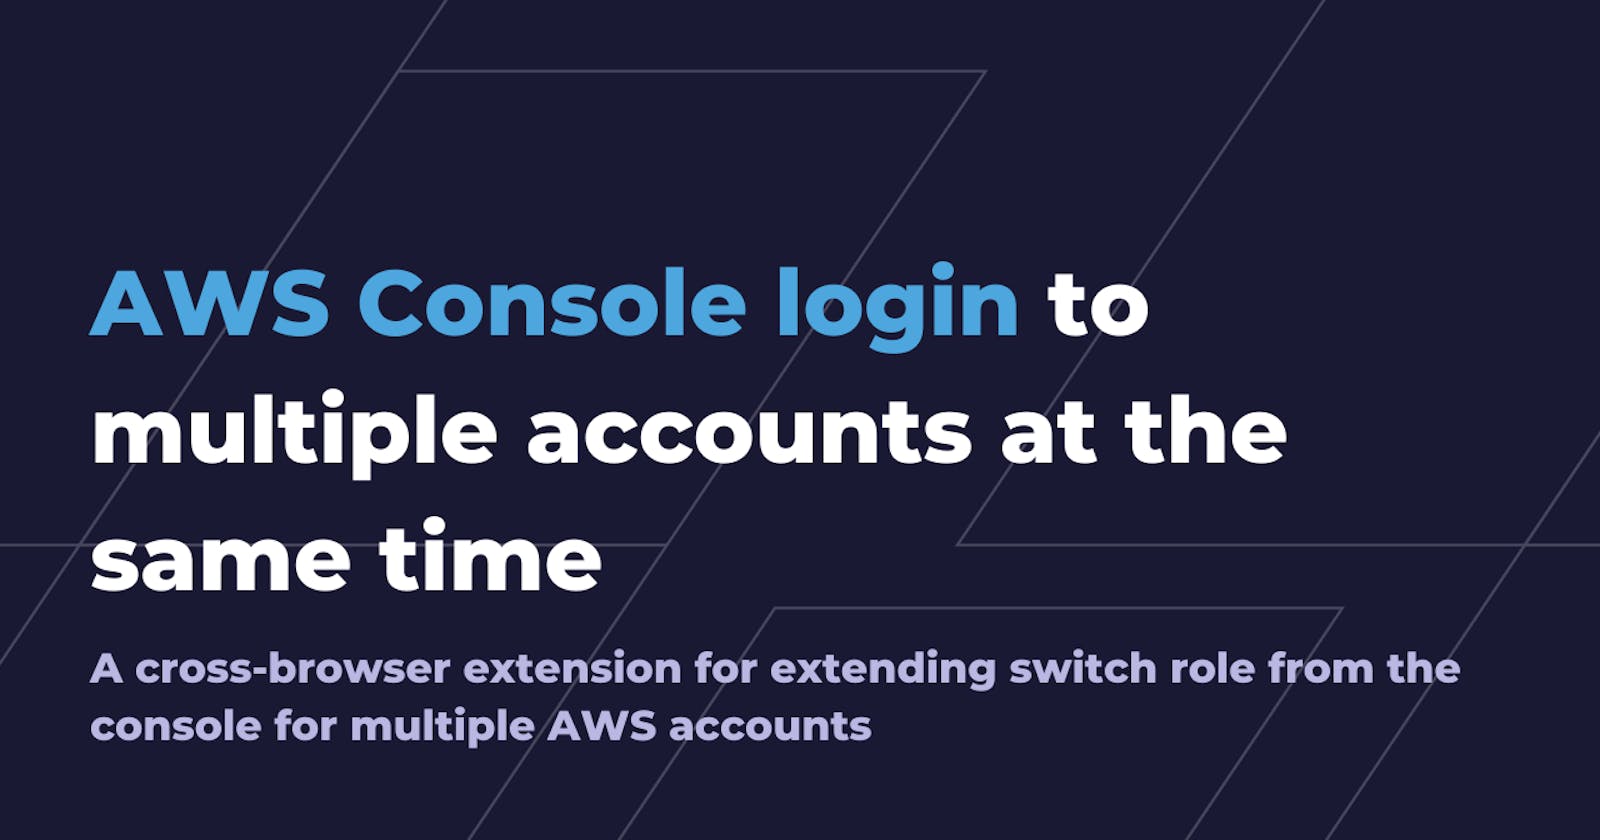 AWS Console login to multiple accounts at the same time